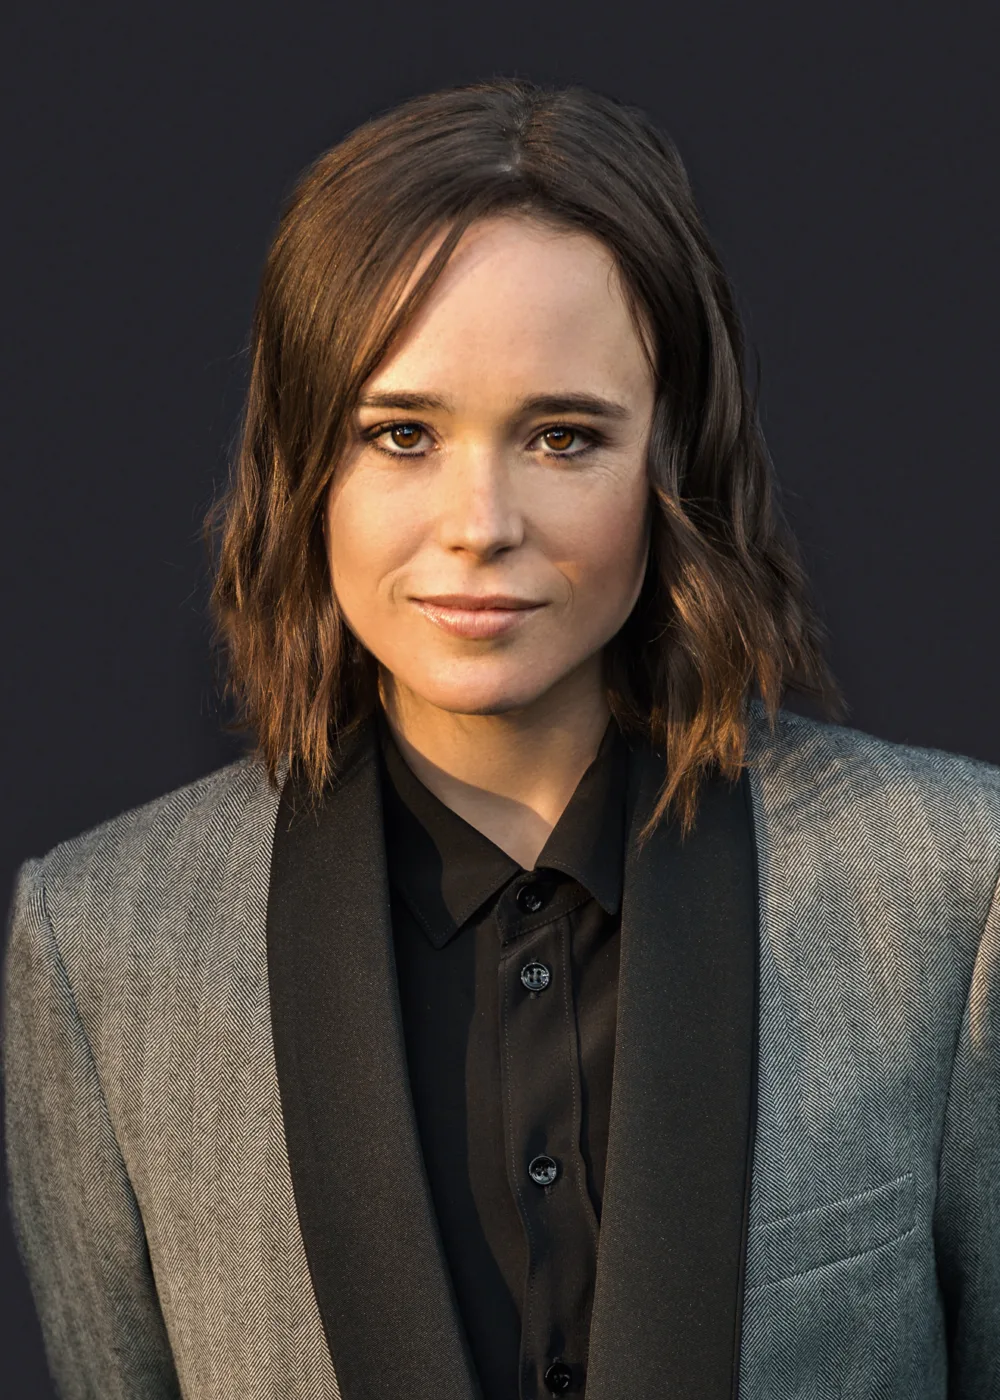 Ellen Page is a Canadian actress known for her talent, intelligence, and dedication to her craft. Born on February 21, 1987, in Halifax, Nova Scotia, Page began acting in her early teens and quickly gained recognition for her work in independent films. She achieved mainstream success with her breakthrough role in the 2007 film Juno, for which she earned an Academy Award nomination for Best Actress. Page is known for her ability to inhabit complex and challenging characters, and has received widespread critical acclaim for her work. She has appeared in numerous films, including Inception, Whip It, and X-Men: Days of Future Past, as well as in television shows like The Umbrella Academy. In addition to her acting career, Page is also known for her advocacy work for LGBTQ rights and environmental causes. She has been an outspoken advocate for the rights of marginalized communities and has used her platform to raise awareness about important social issues. With her talent, intelligence, and activism, Page has become a beloved and respected figure in the entertainment industry and beyond.